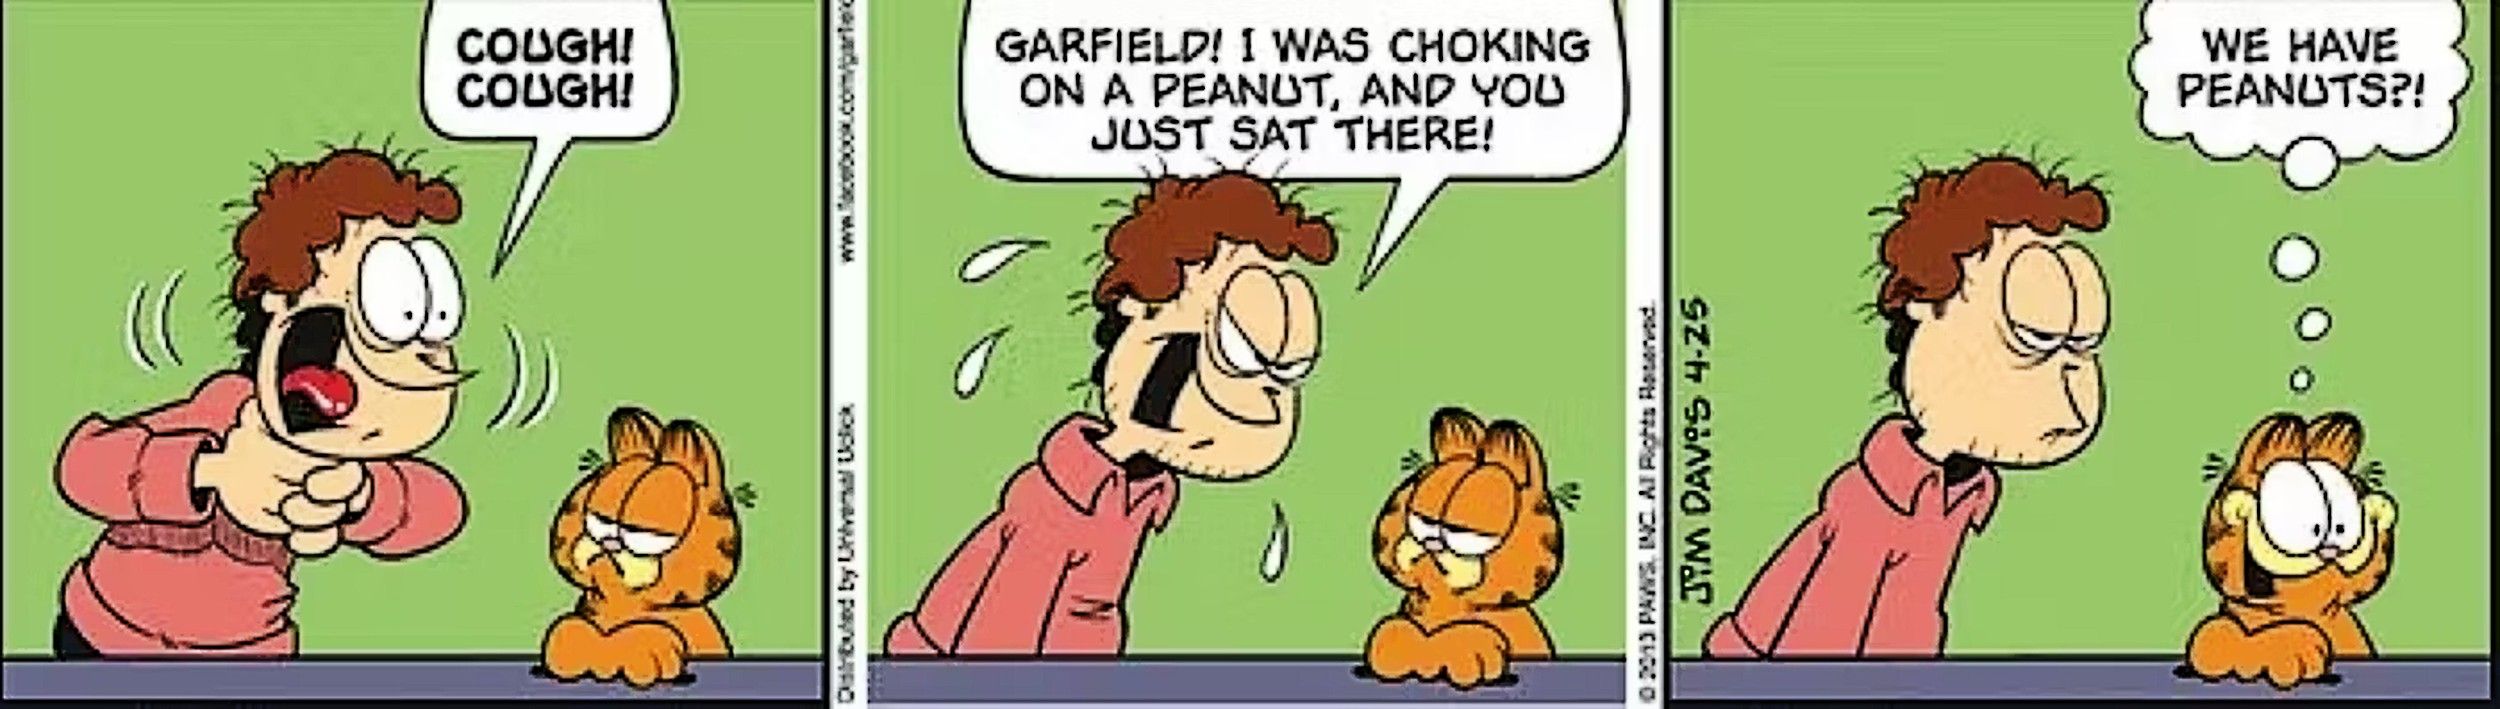 Jon Arbuckle nearly chokes to death on a peanut while Garfield watches